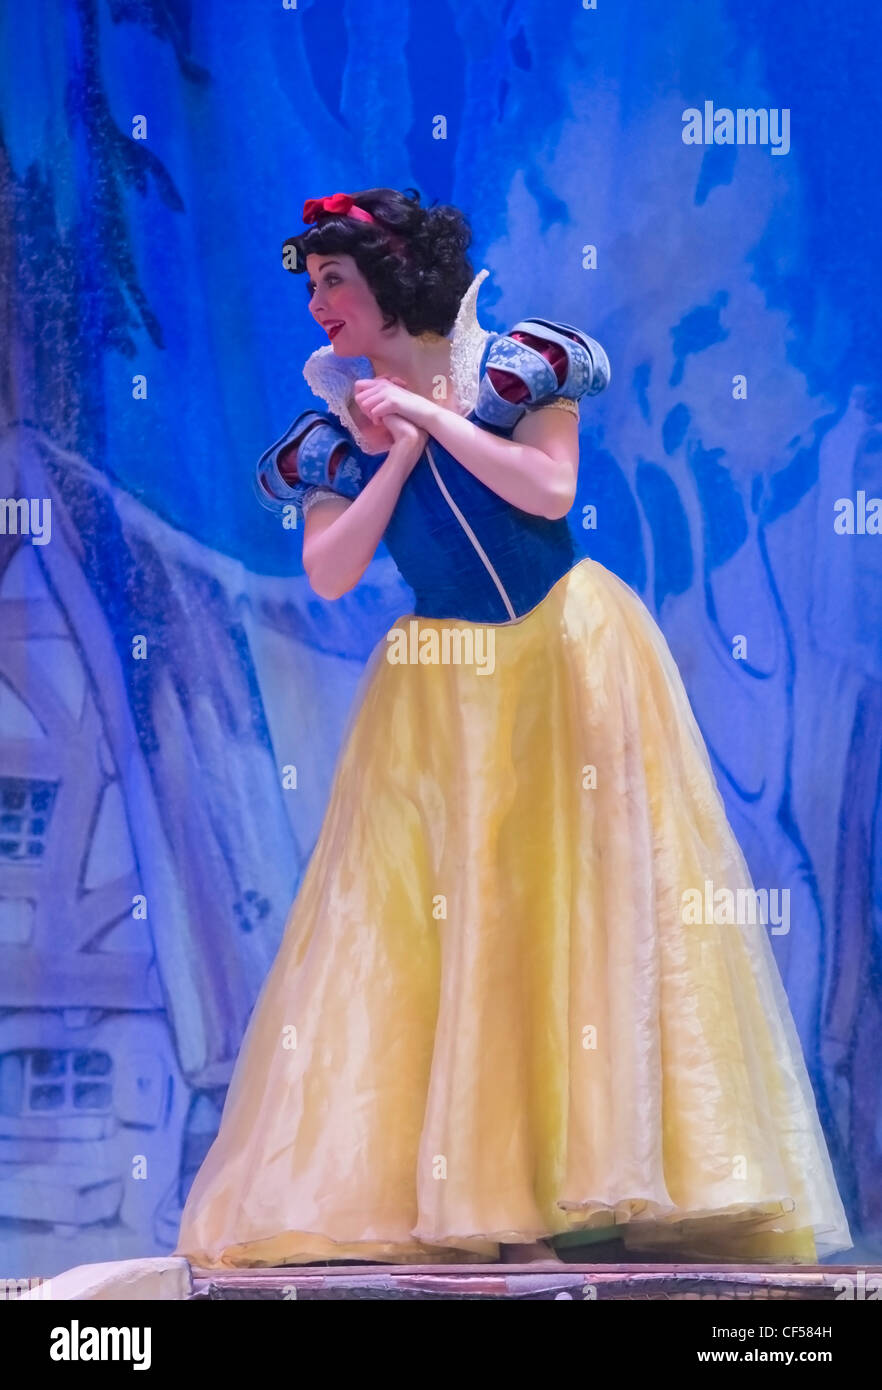 Snow White standing in a blue and yellow dress at the Disney Princesses show at the Resch Center in Green Bay Stock Photo